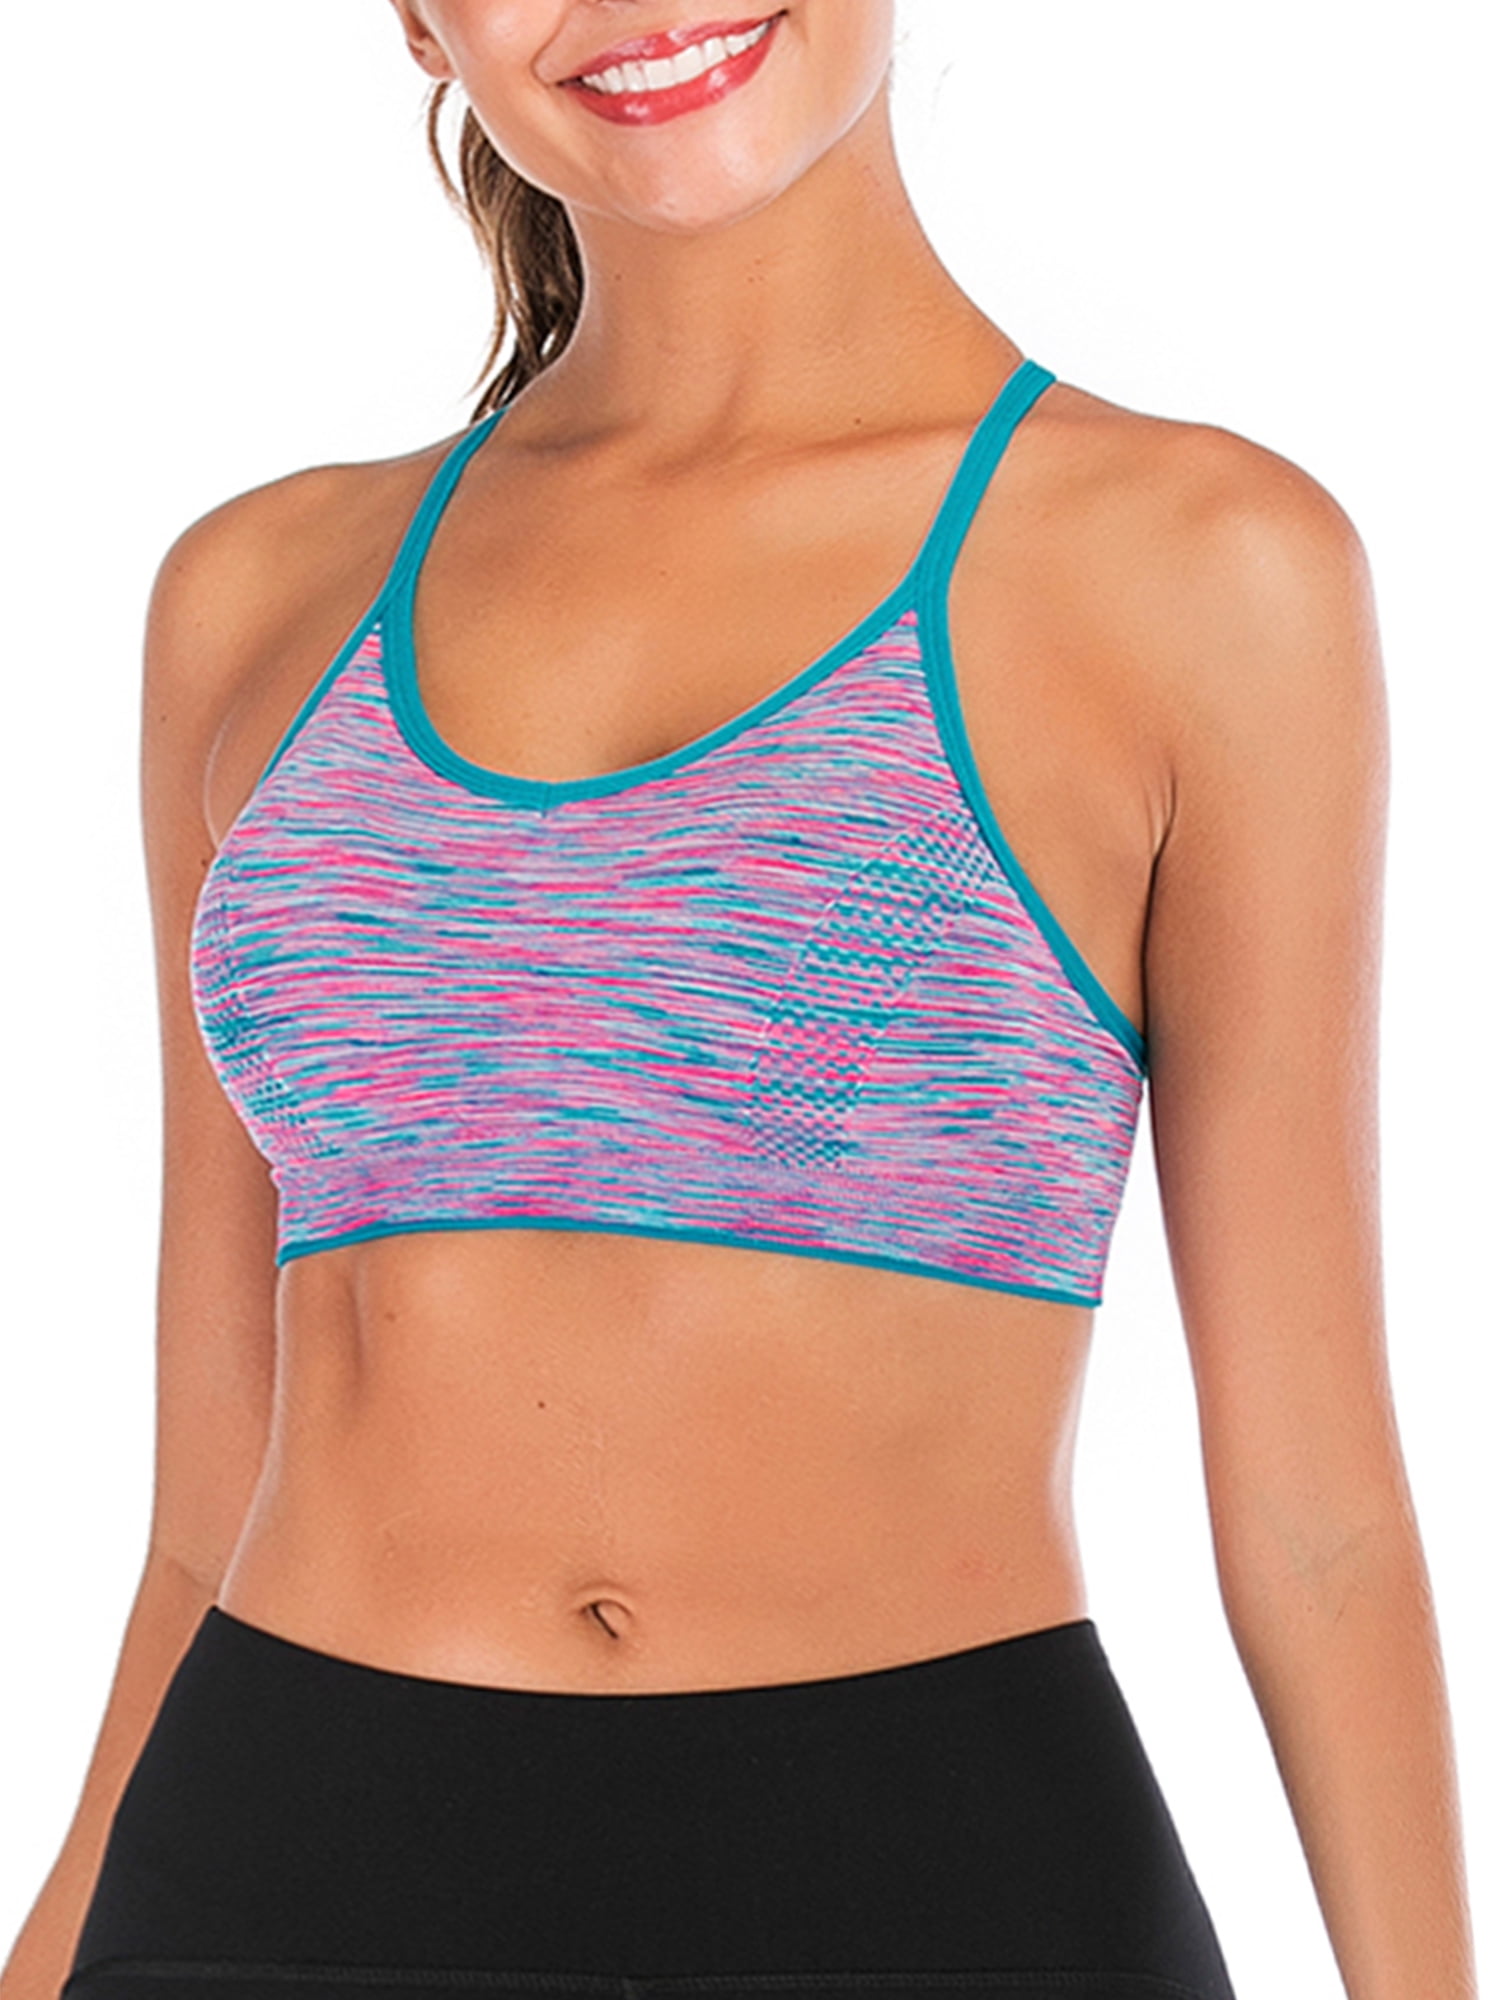 Womens Seamless Sports Bra Padded Comfort Support Workout Yoga Top Activewear 